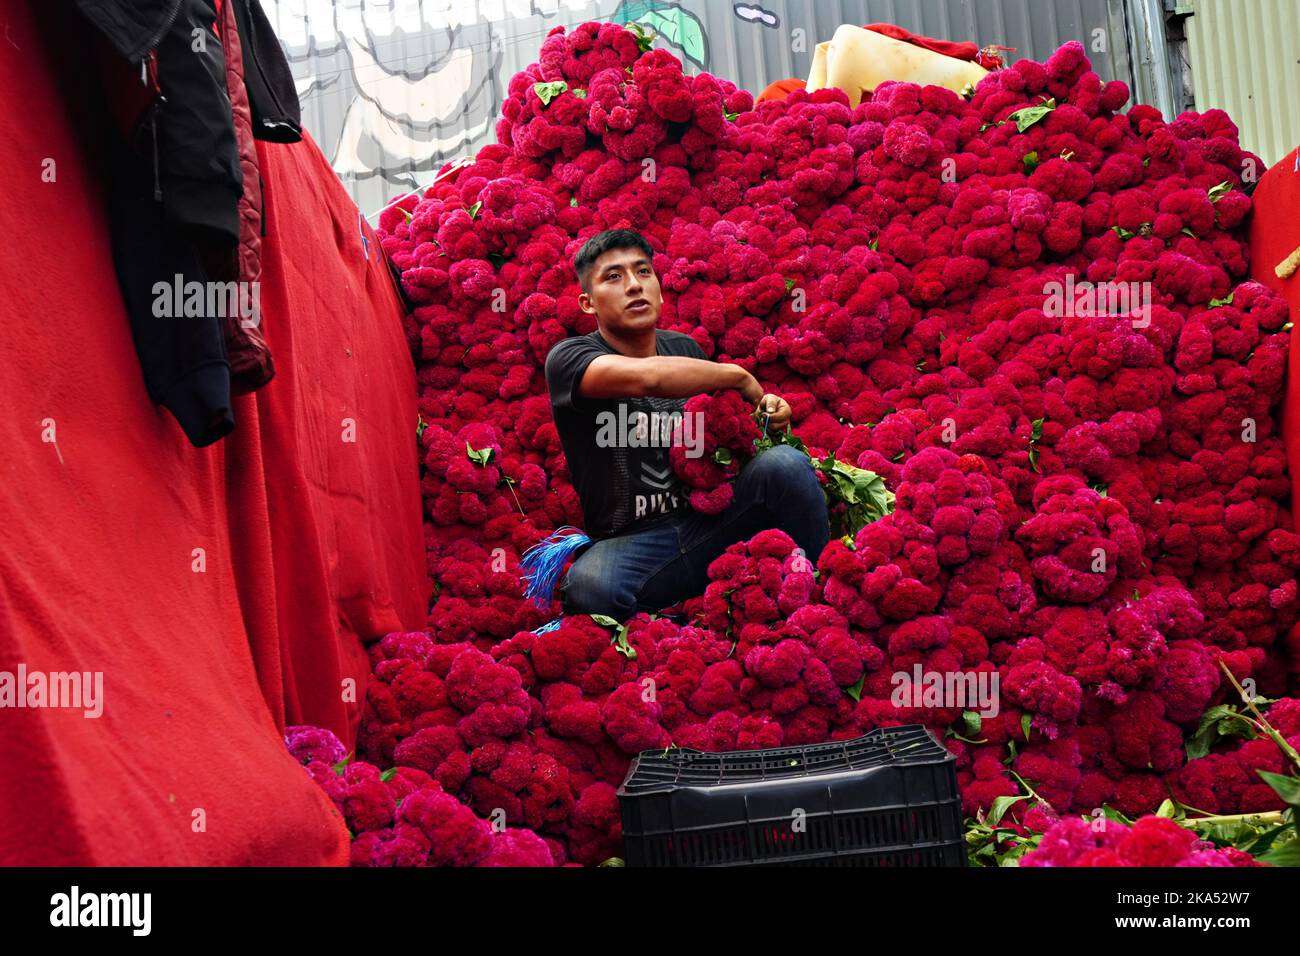 Mexico City, Mexico. 31st Oct, 2022. A farm worker arranges bundles of red cockscomb flowers used to decorate altars and gravesites during the annual Day of the Dead festival at the Jamaica Flower Market, October 31, 2022 in Mexico City, Mexico. Credit: Richard Ellis/Richard Ellis/Alamy Live News Stock Photo